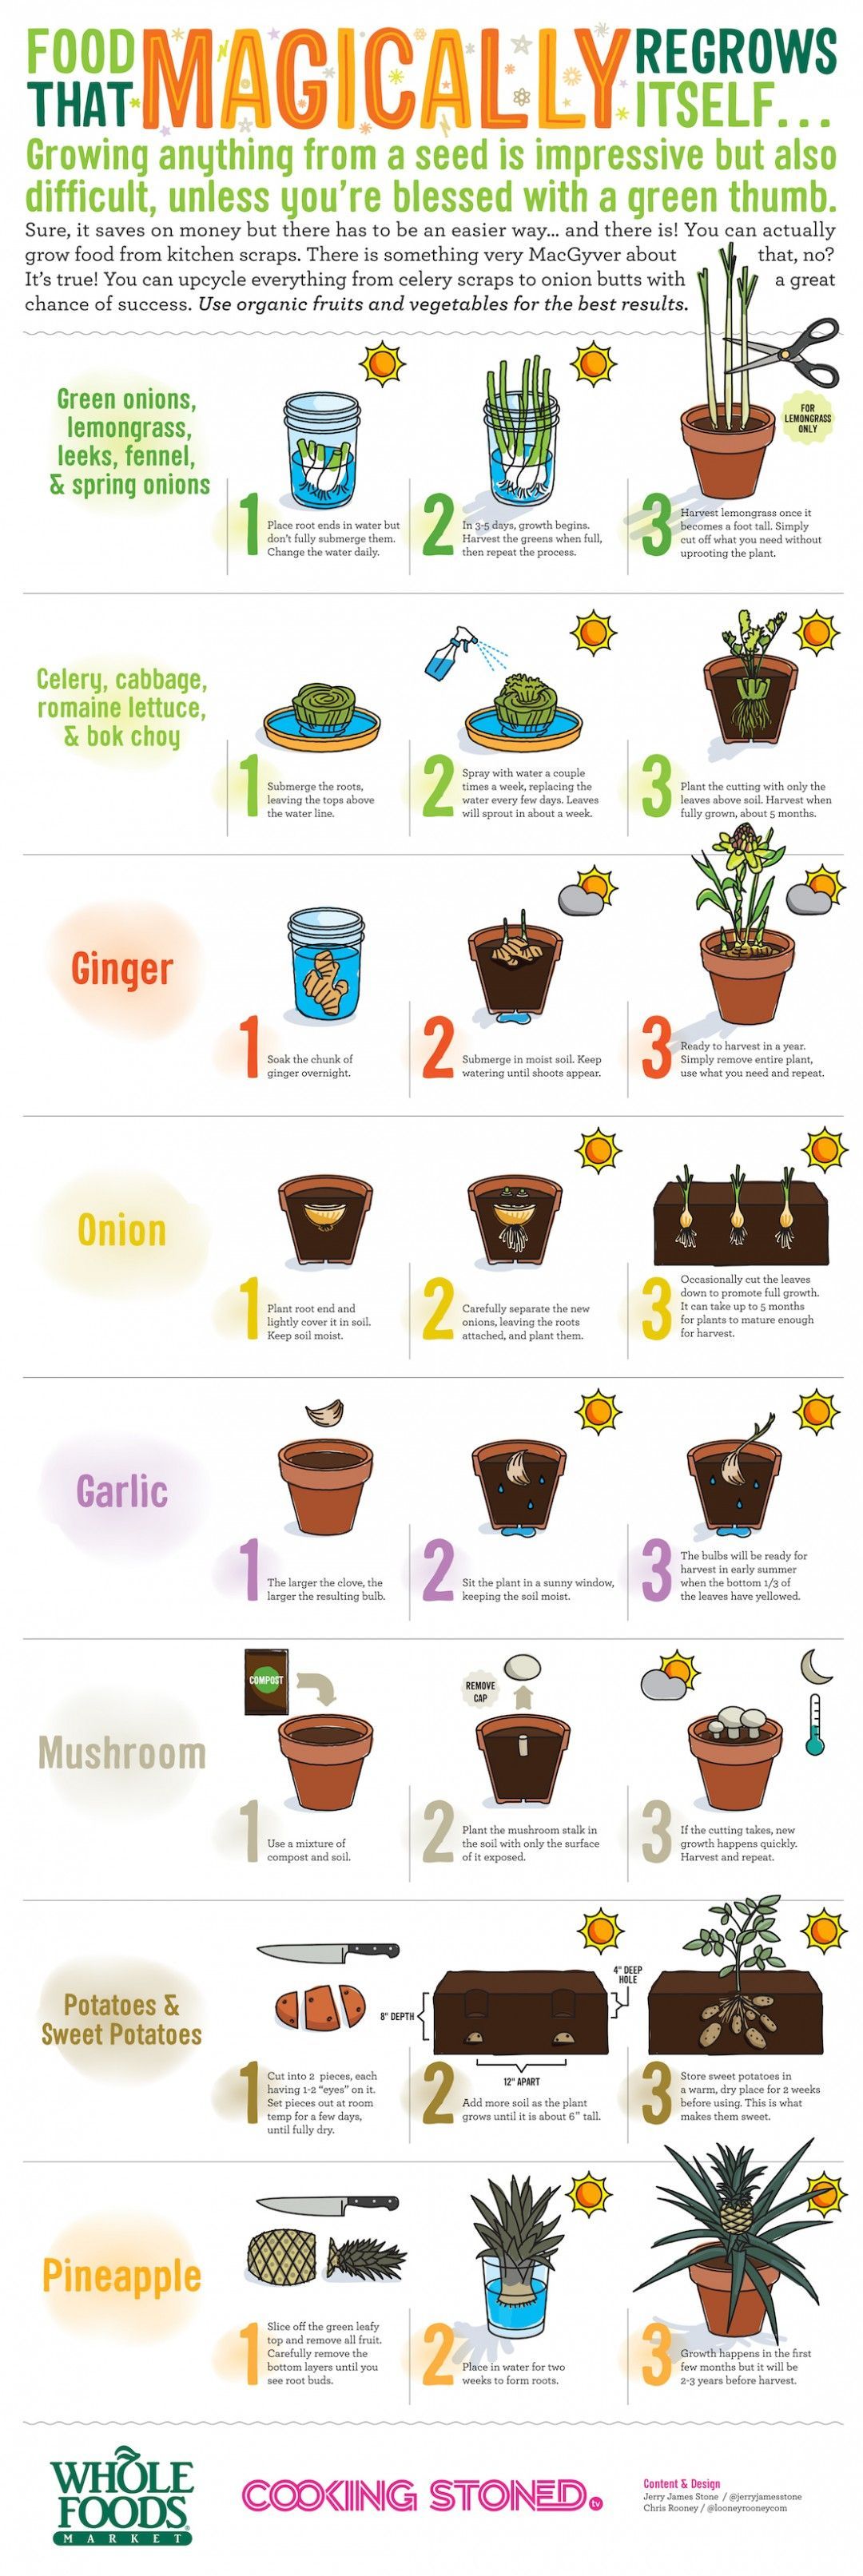 Did you know you can regrow plants from kitchen scraps? A lot of different fruits and veggies can be regrown and well show you